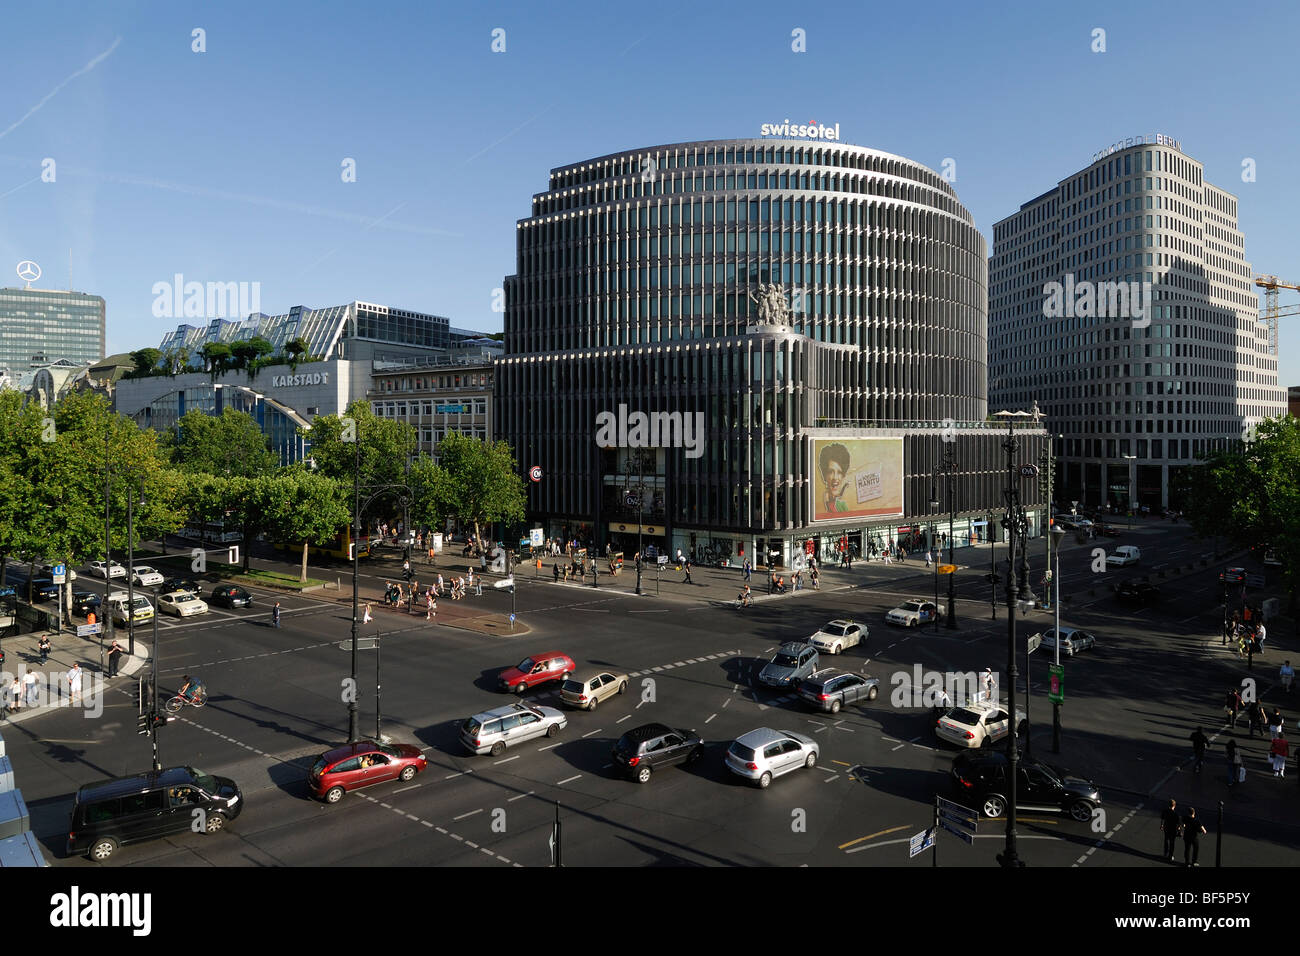 Berlin. Germany. View of Kurfürstendamm at the intersection with Joachimstaler Strasse and the Swissotel building. Stock Photo